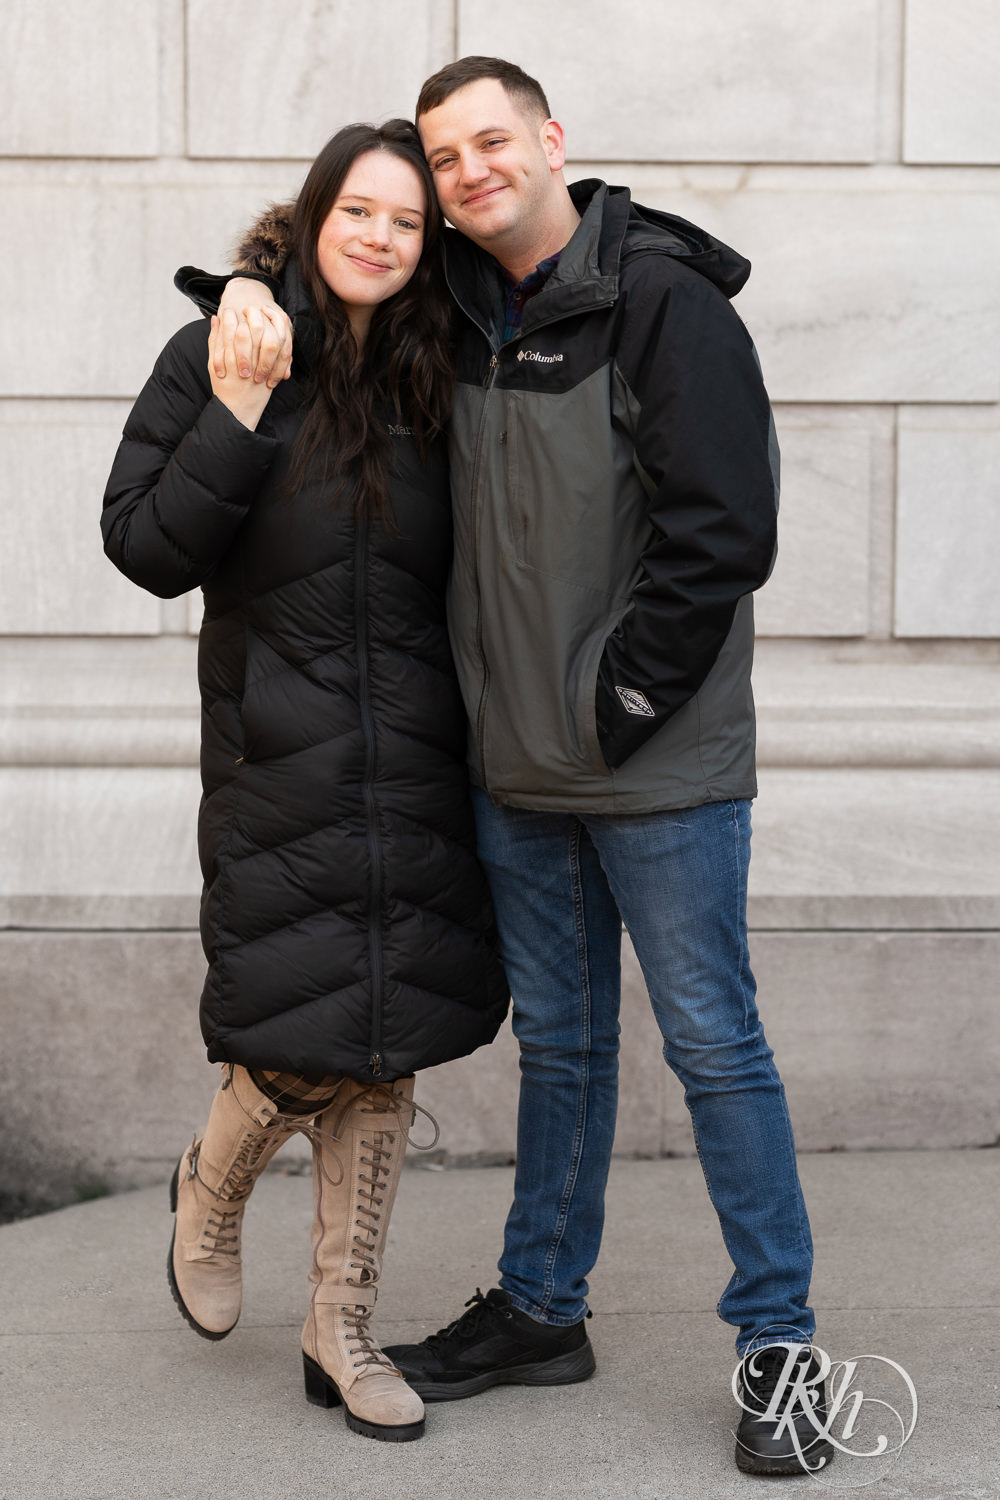 Man and woman in jackets smile in front of the Saint Paul Library in Saint Paul, Minnesota during winter engagement session.